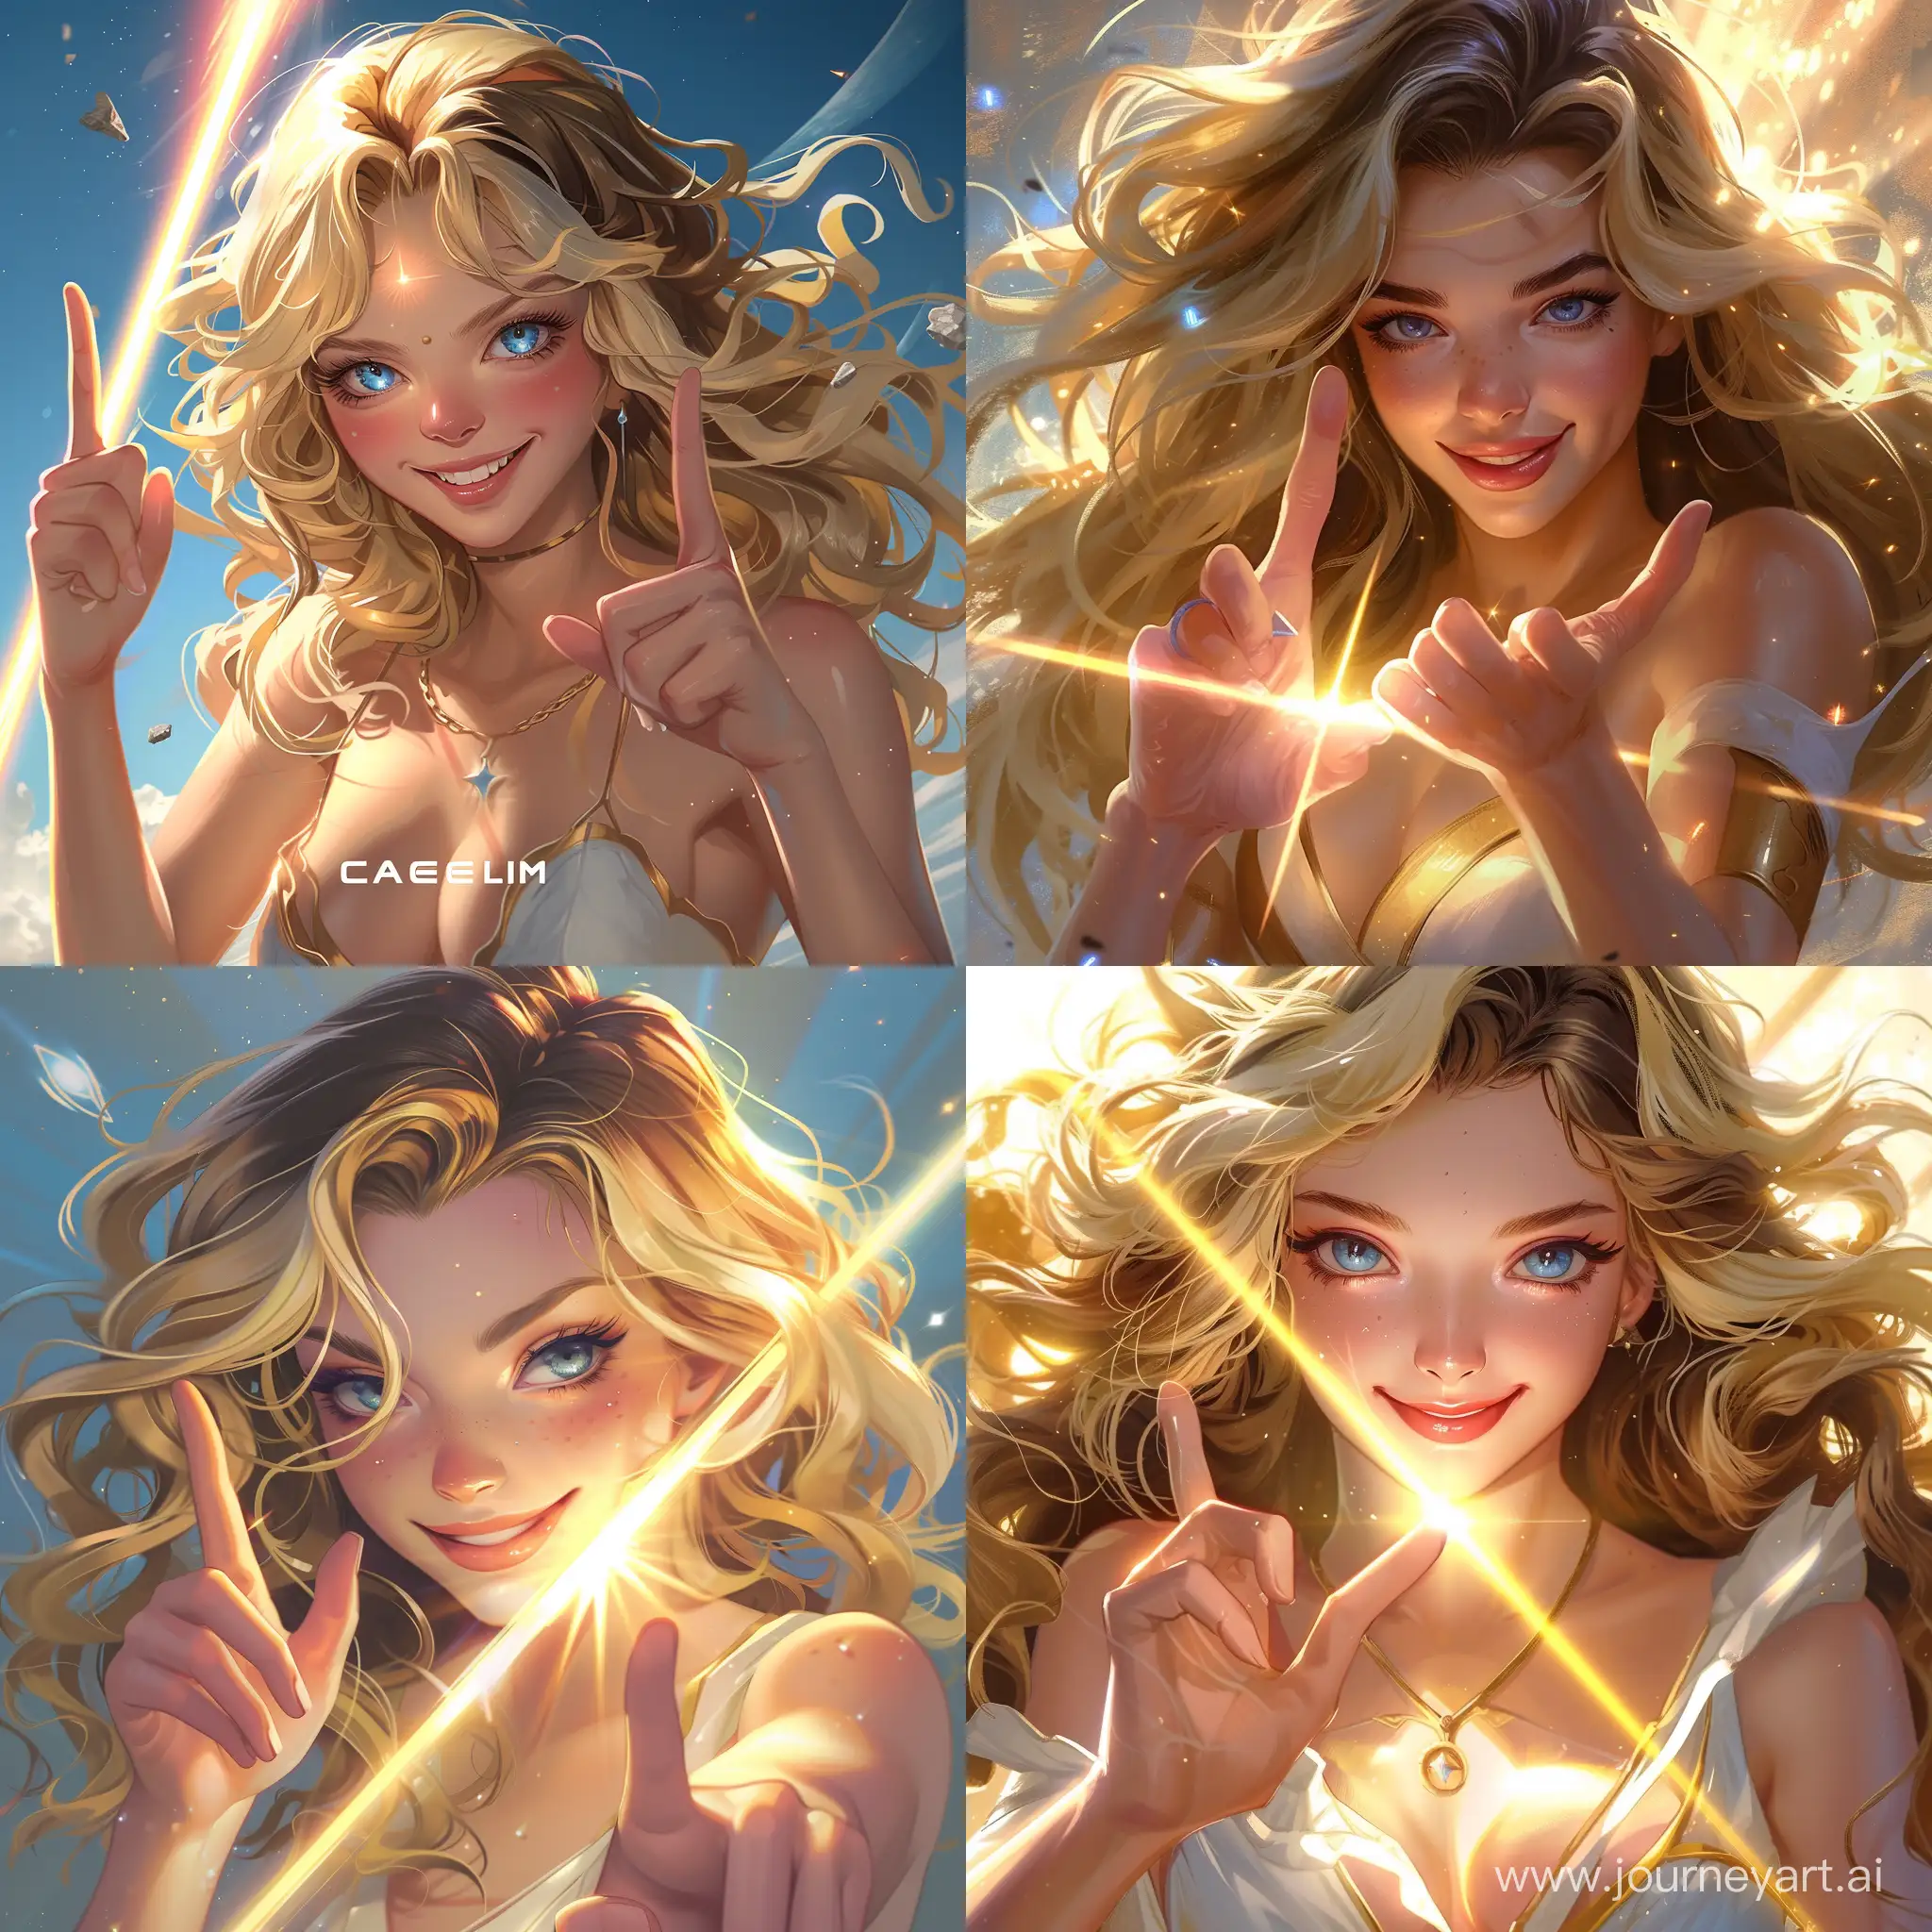 Caelum, goddess of the sky, goddess of light, goddess of good fortune, a beautiful androngynous woman with blonde and brunette hair, one hand pointing at the ground with two fingers, the other hand holding a beam of pure light, a serene smile on her face, vibrant blue eyes